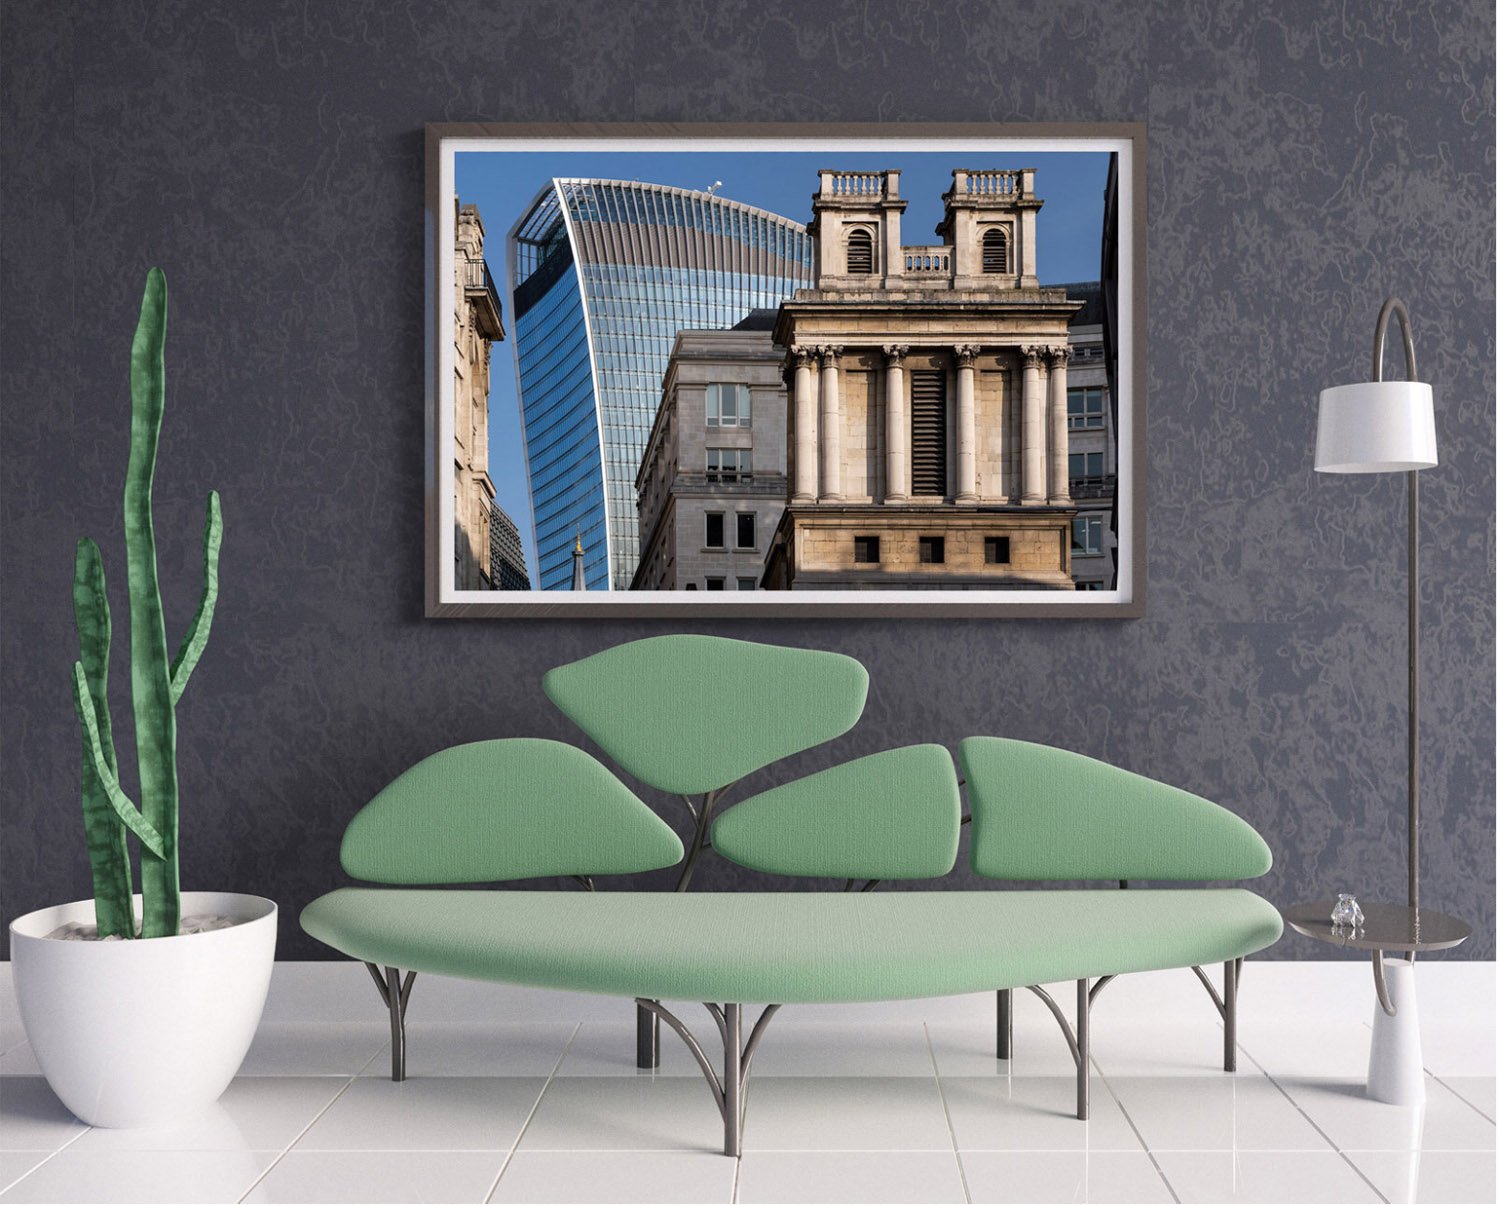  Fine art print of the City of London modern and old archiecture. 